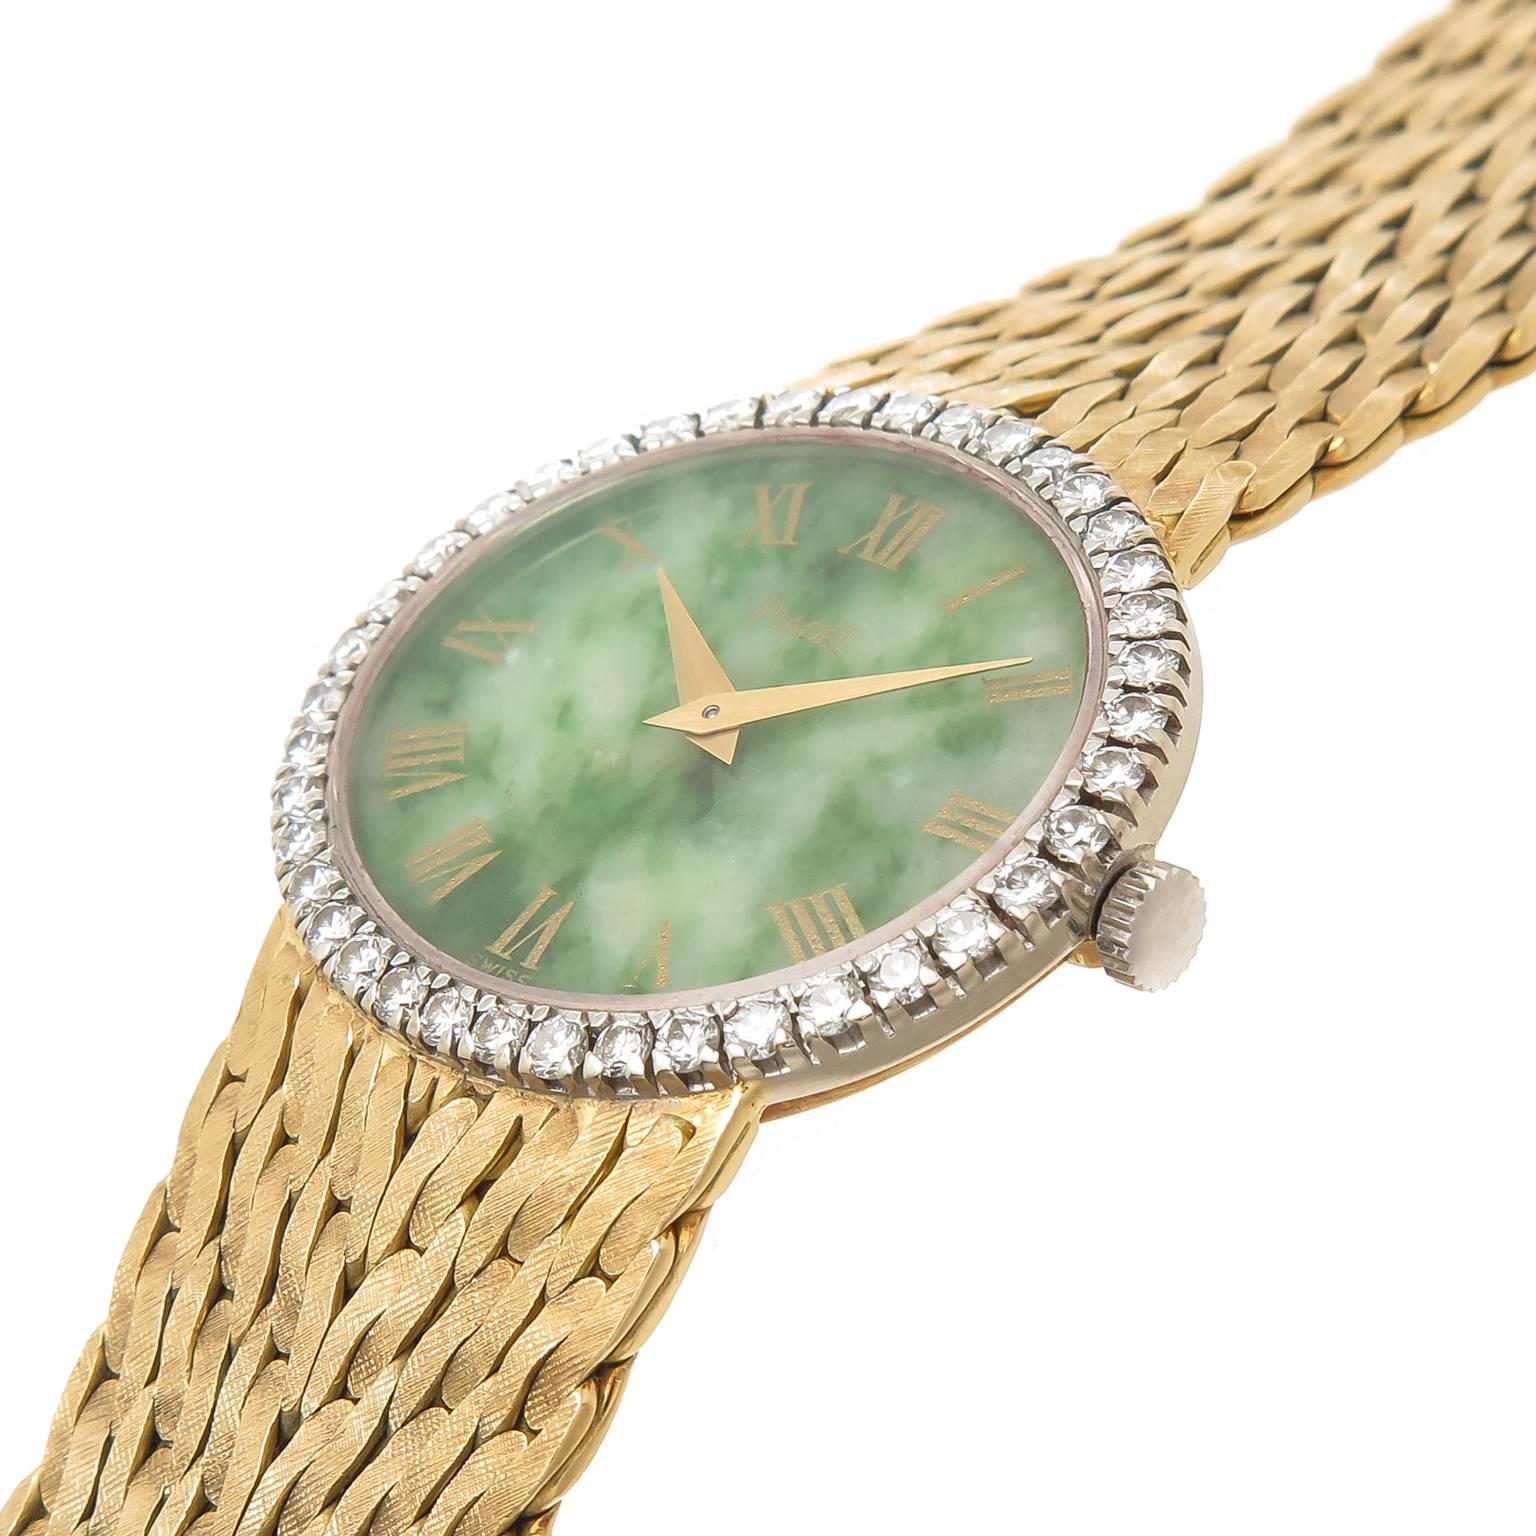 Circa 1980s Ladies Piaget Wrist Watch, 27 X 24 MM 18K Yellow Gold case, Factory Diamond bezel set with Round Brilliant cut Diamonds totaling 1 Carat, Green Nephrite Dial with Gold Hands. 17 Jewel Mechanical, manual wind movement.  5/8 inch wide 18K